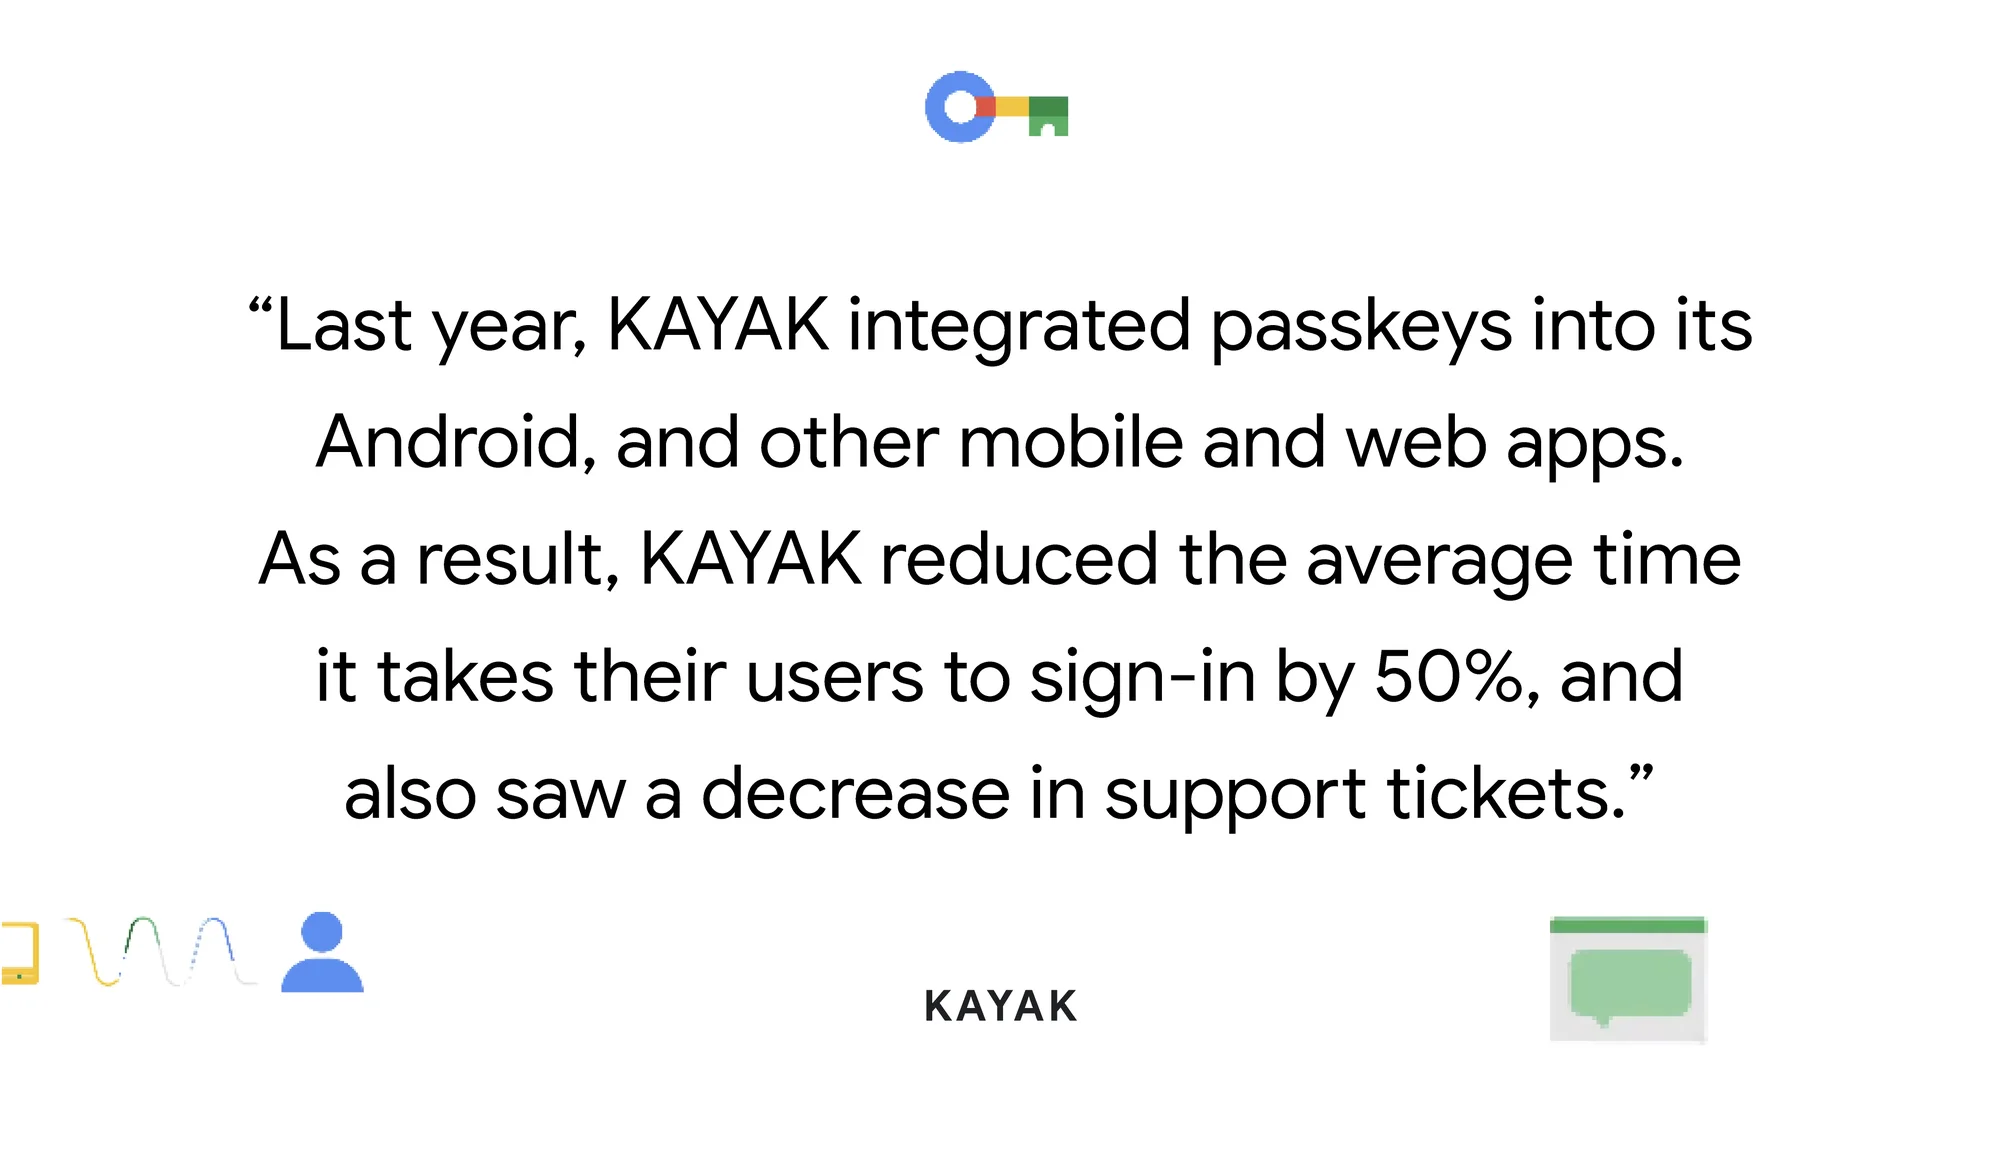 a card that says “Last year, KAYAK integrated passkeys into its Android, and other mobile and web apps. As a result, KAYAK reduced the average time it takes their users to sign-in by 50%, and also saw a decrease in support tickets.” - Kayak